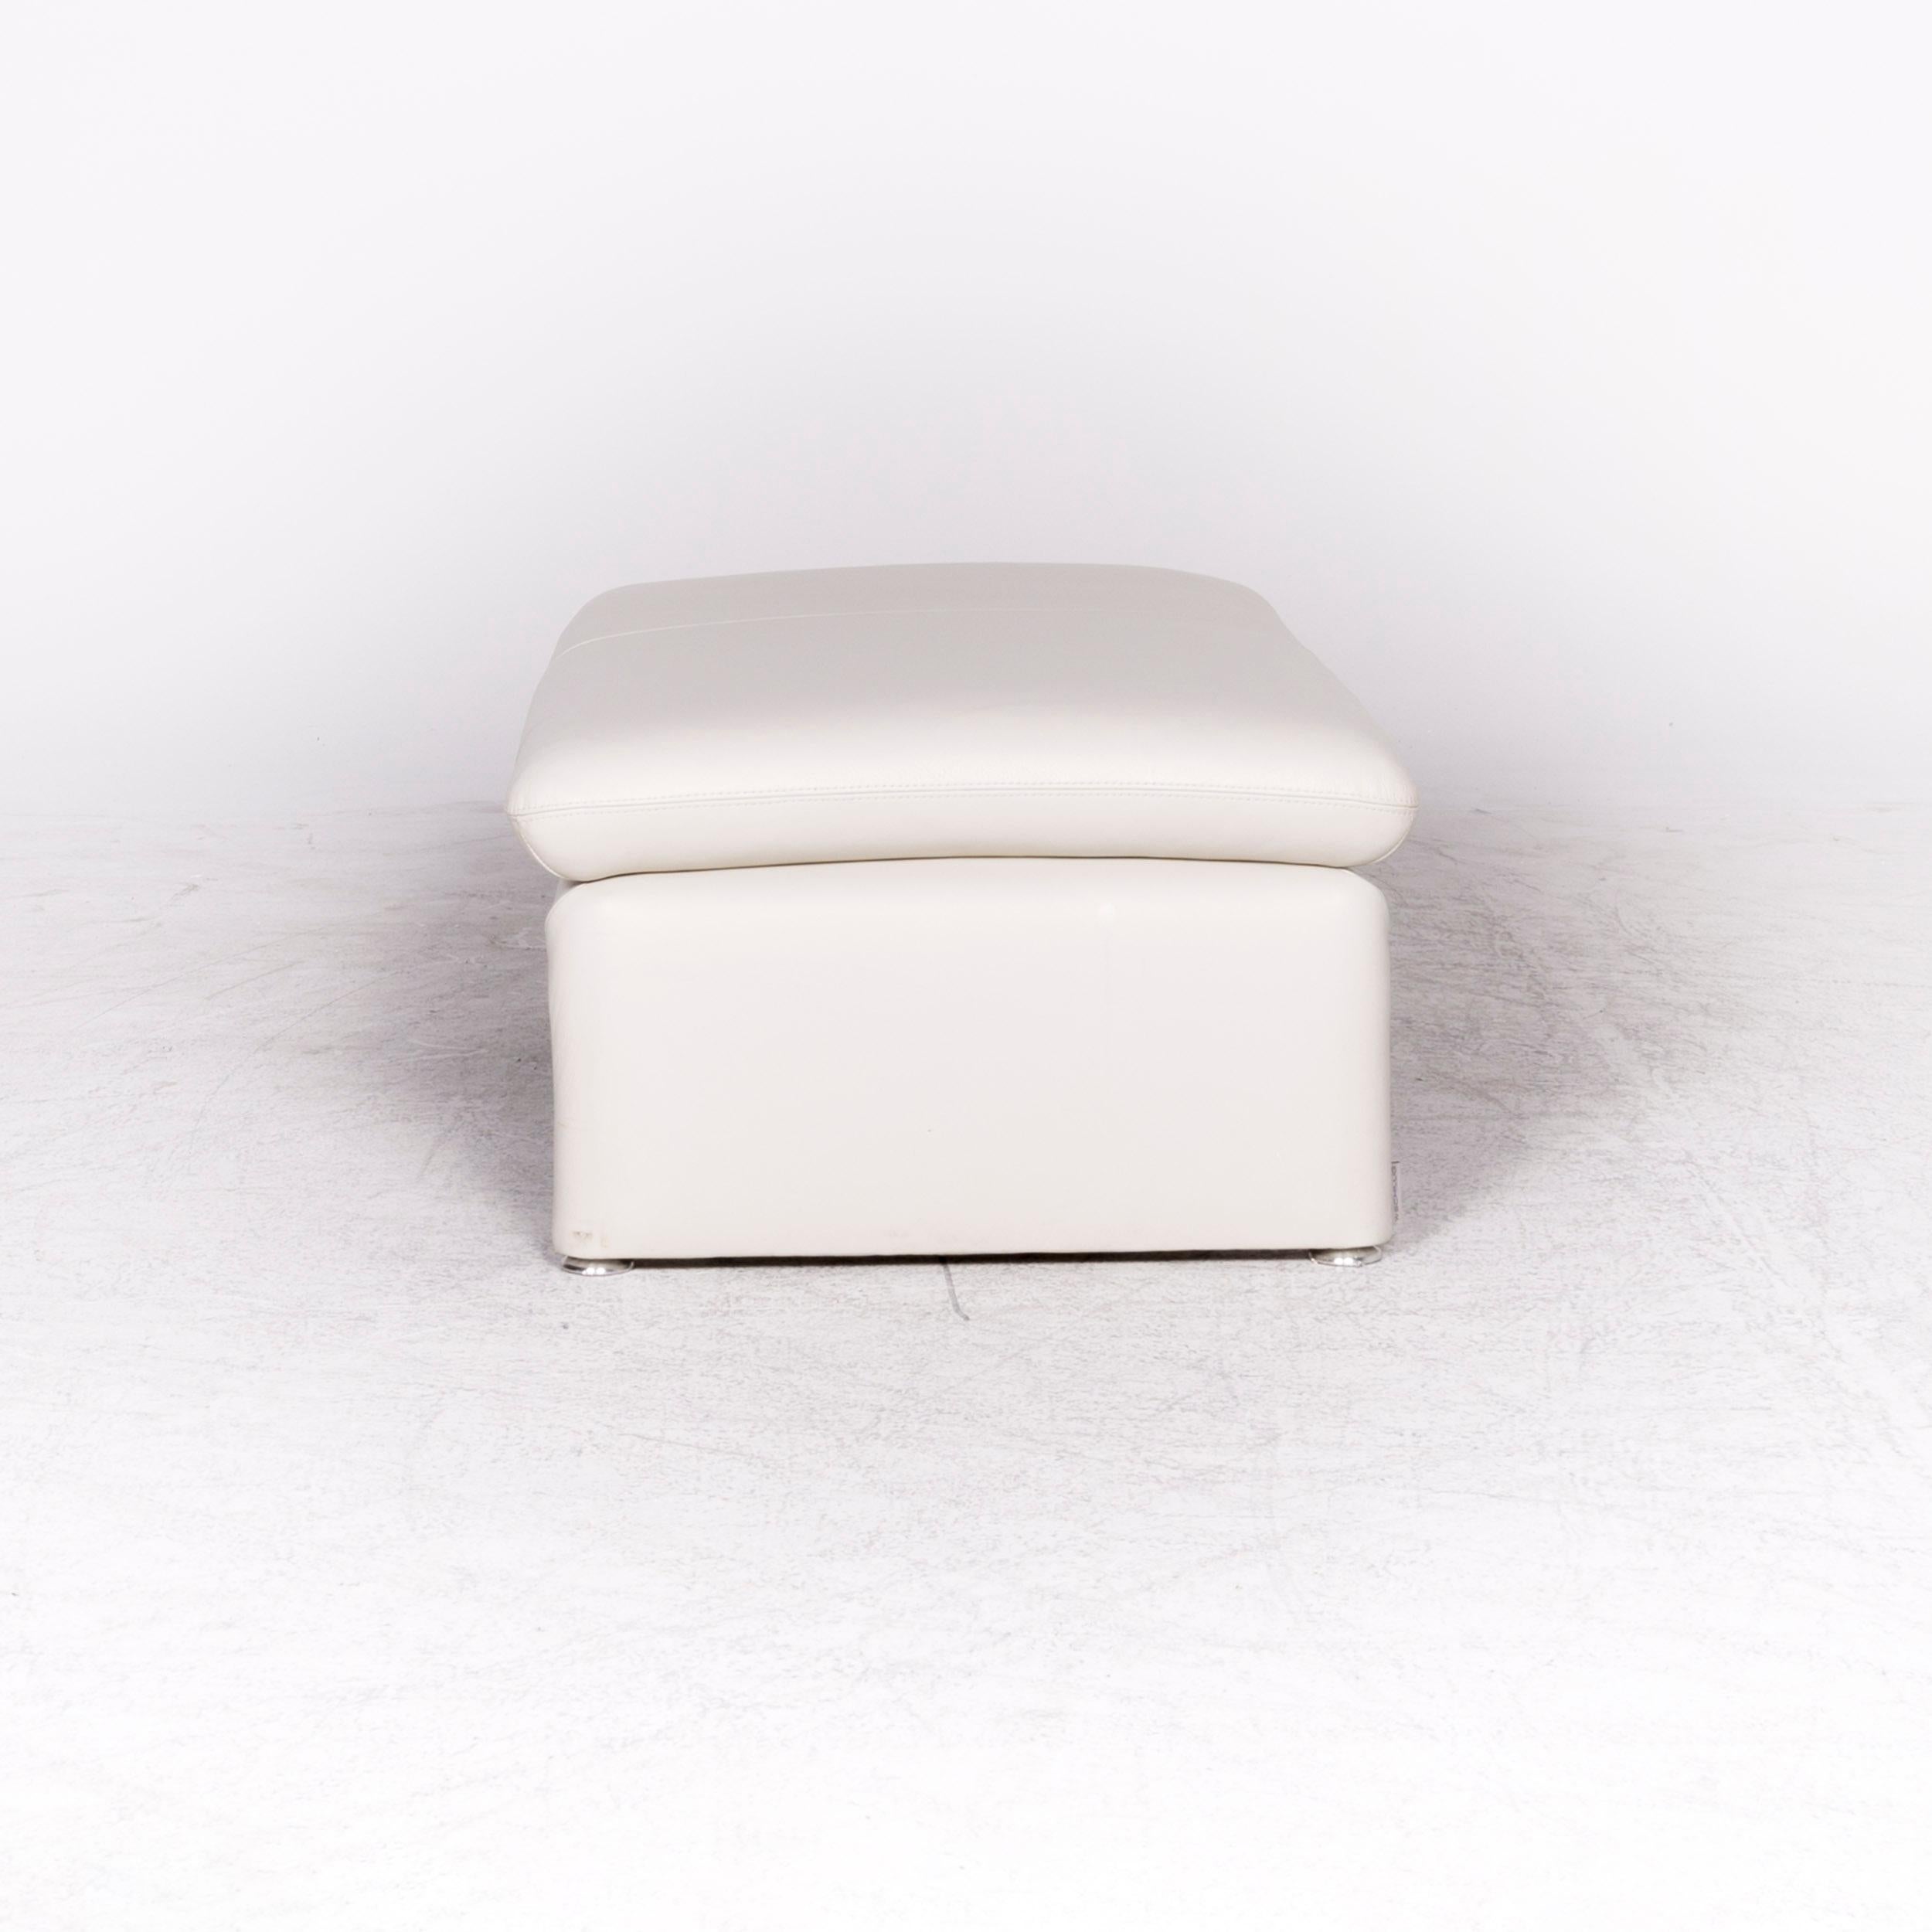 Willi Schillig Brooklyn Designer Leather Stool White Genuine Leather Stool For Sale 2